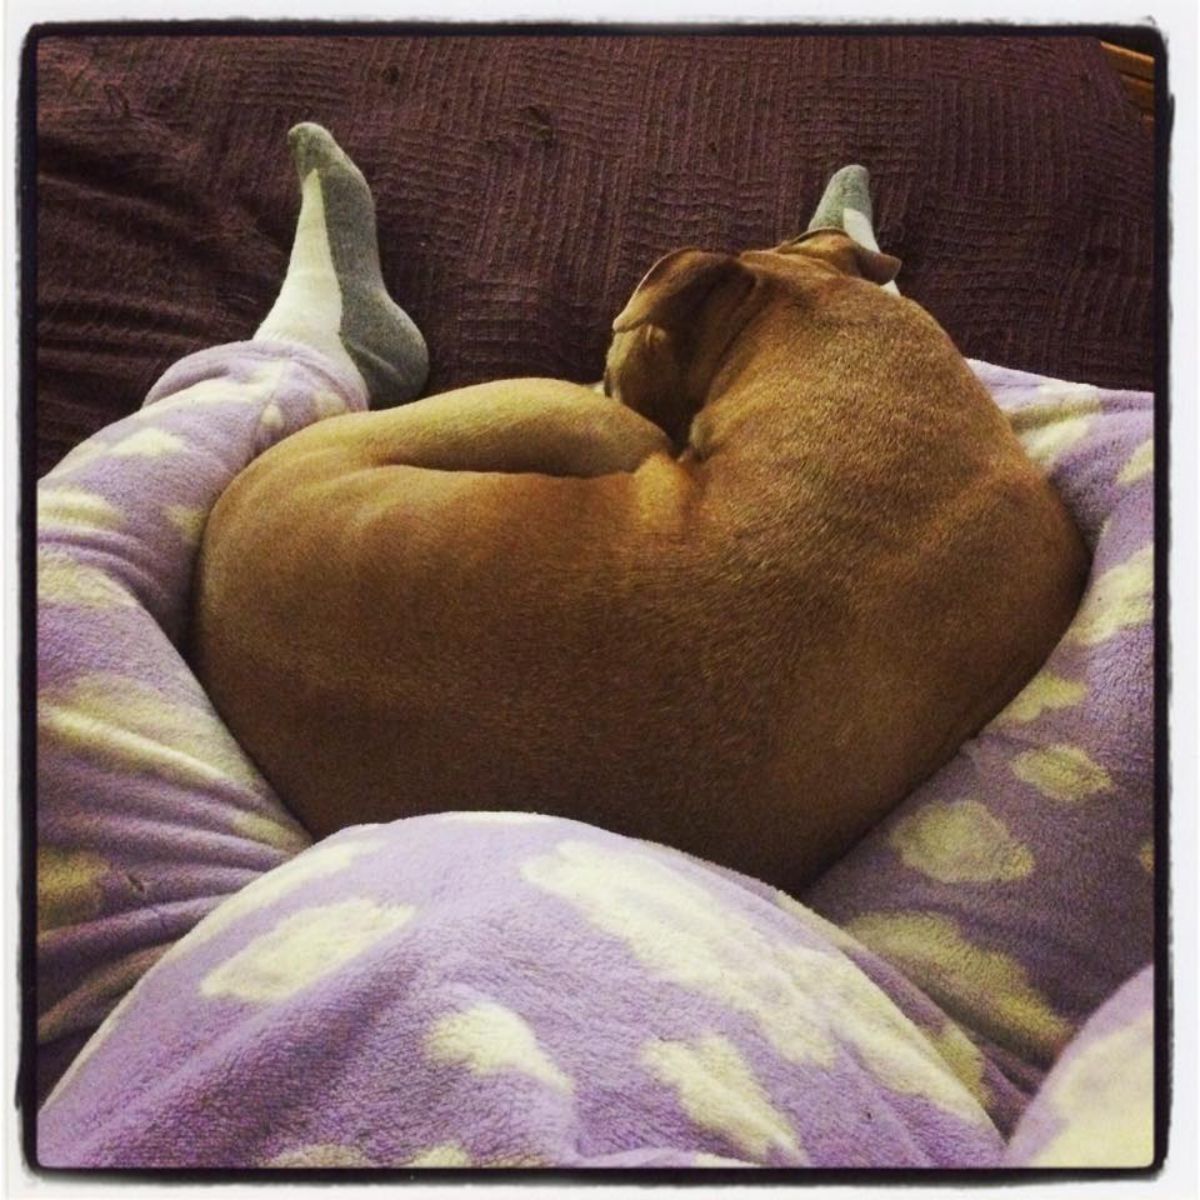 brown dog laying between a pregnant person's legs